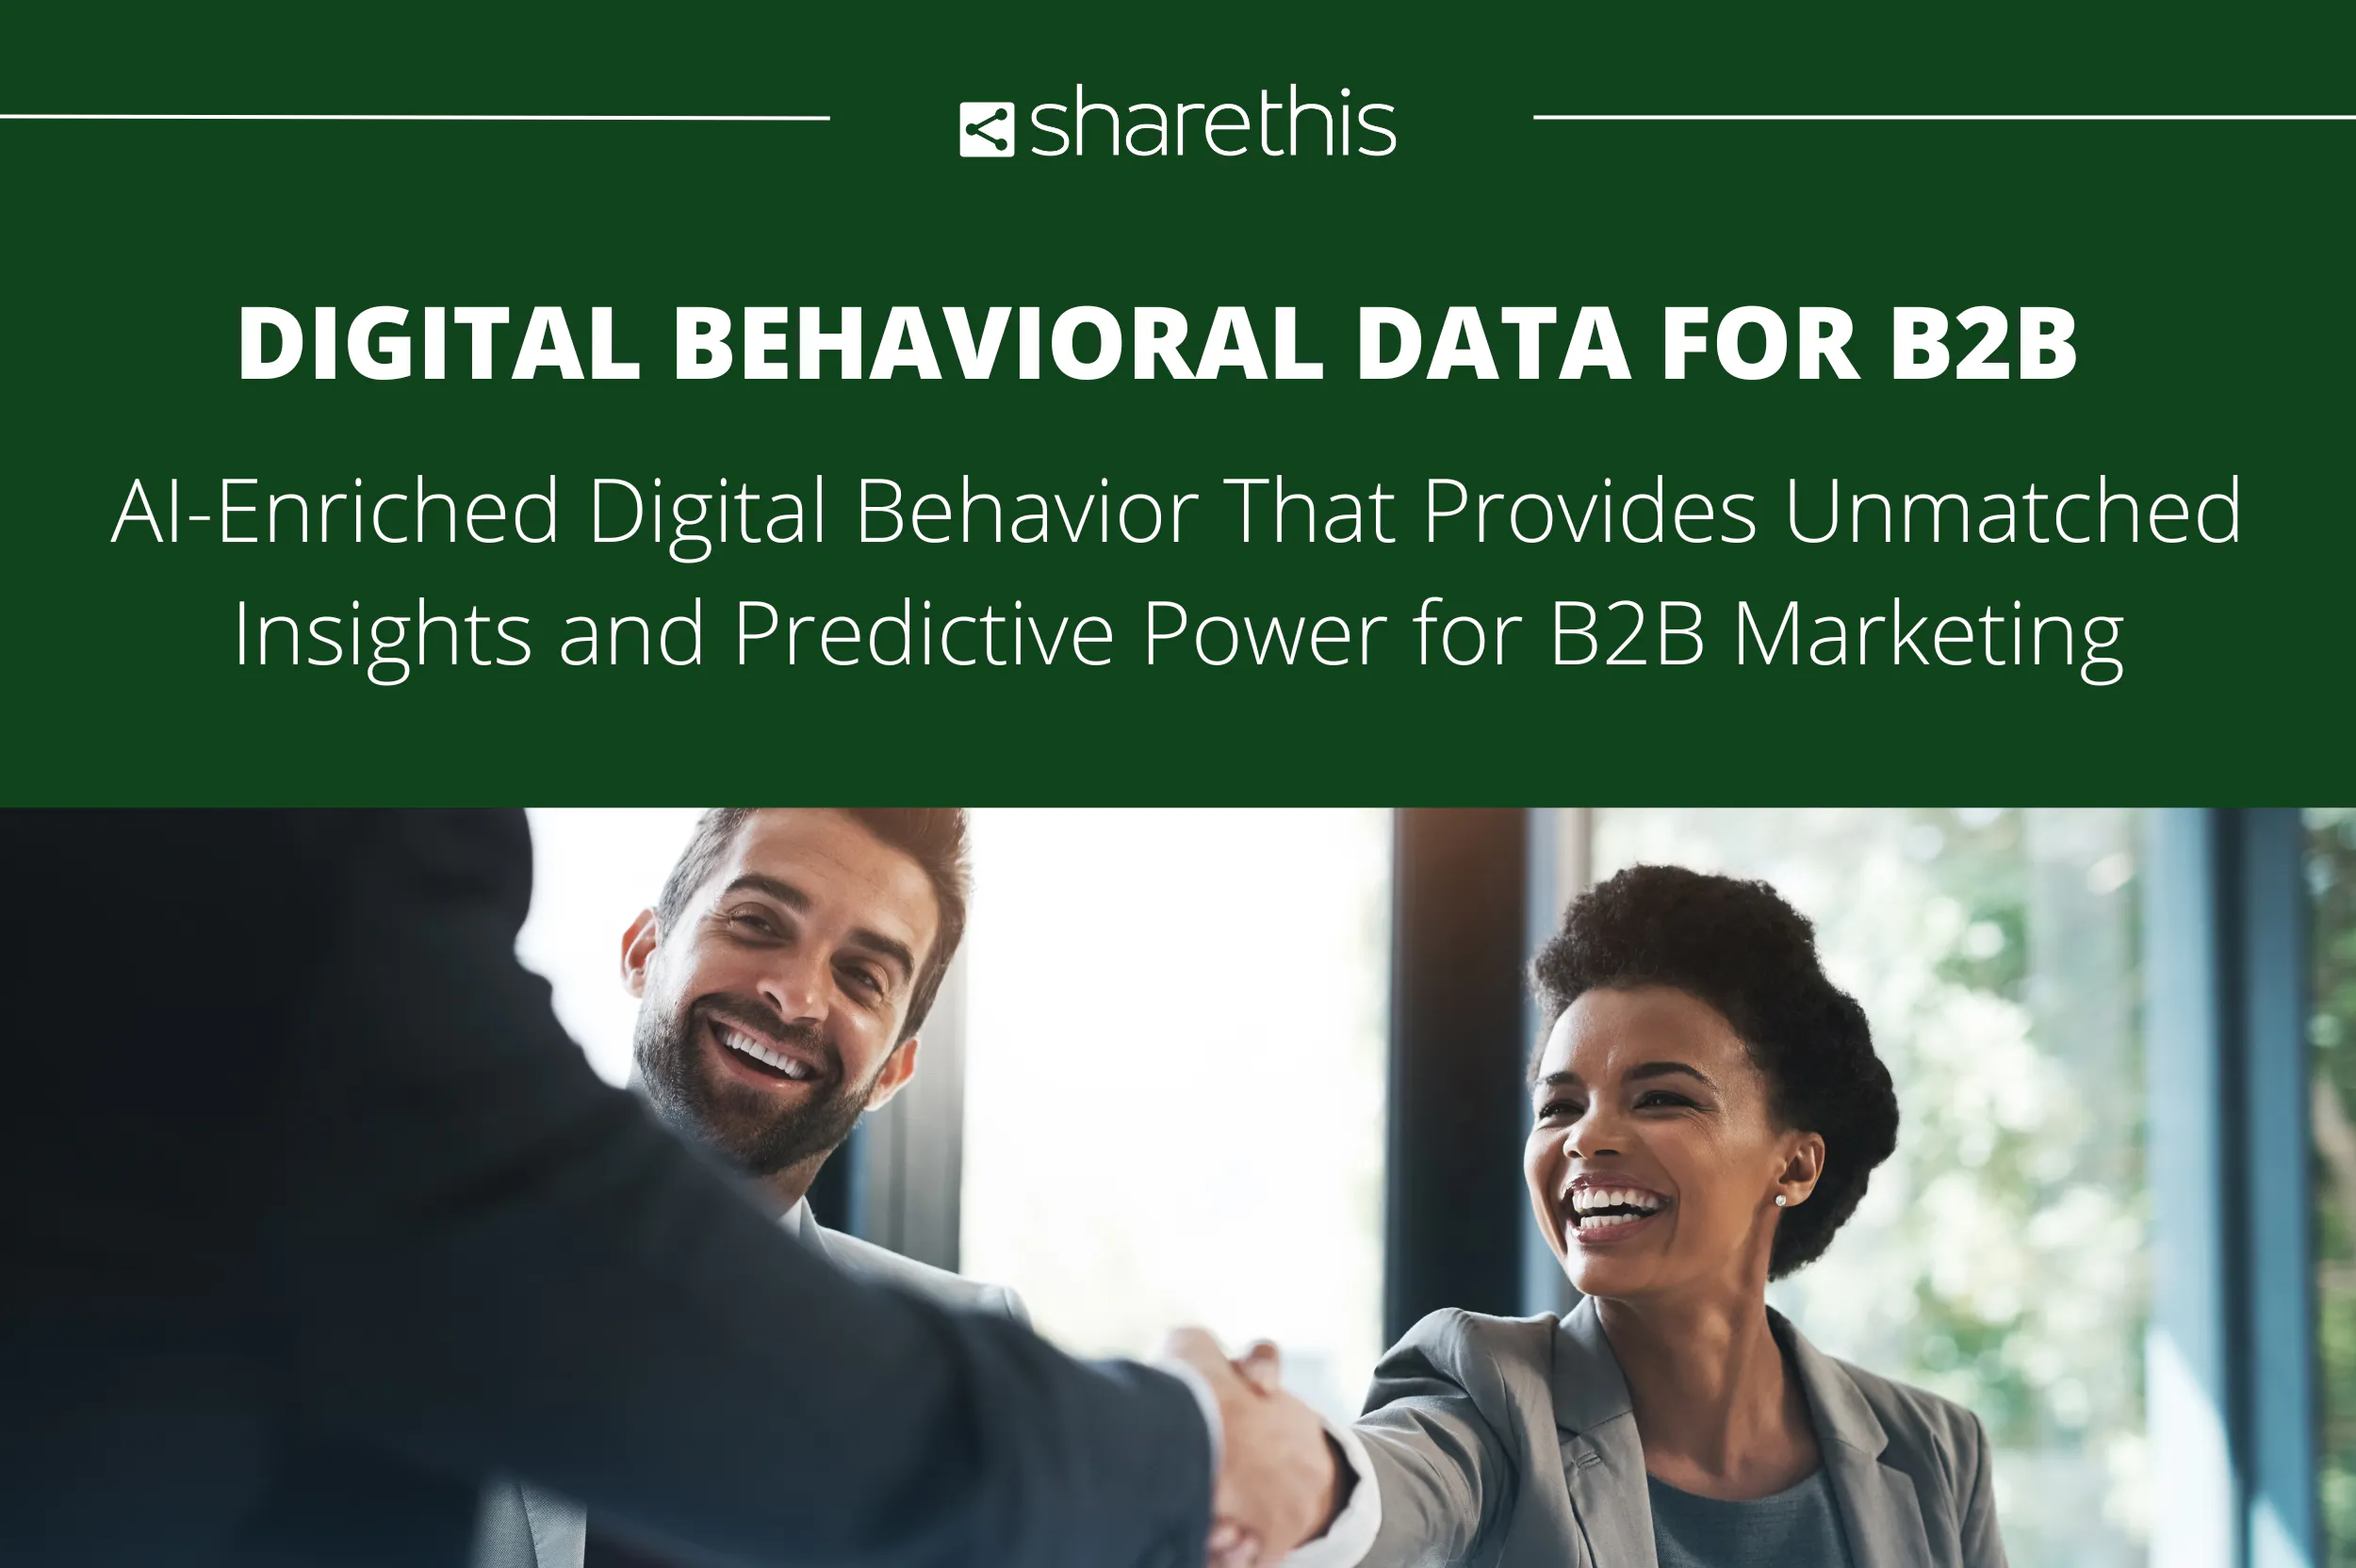 Digital Behavioral Data for B2B: AI-Enriched Digital Behavior That Provides Unmatched Insights and Predictive Power for B2B Marketing